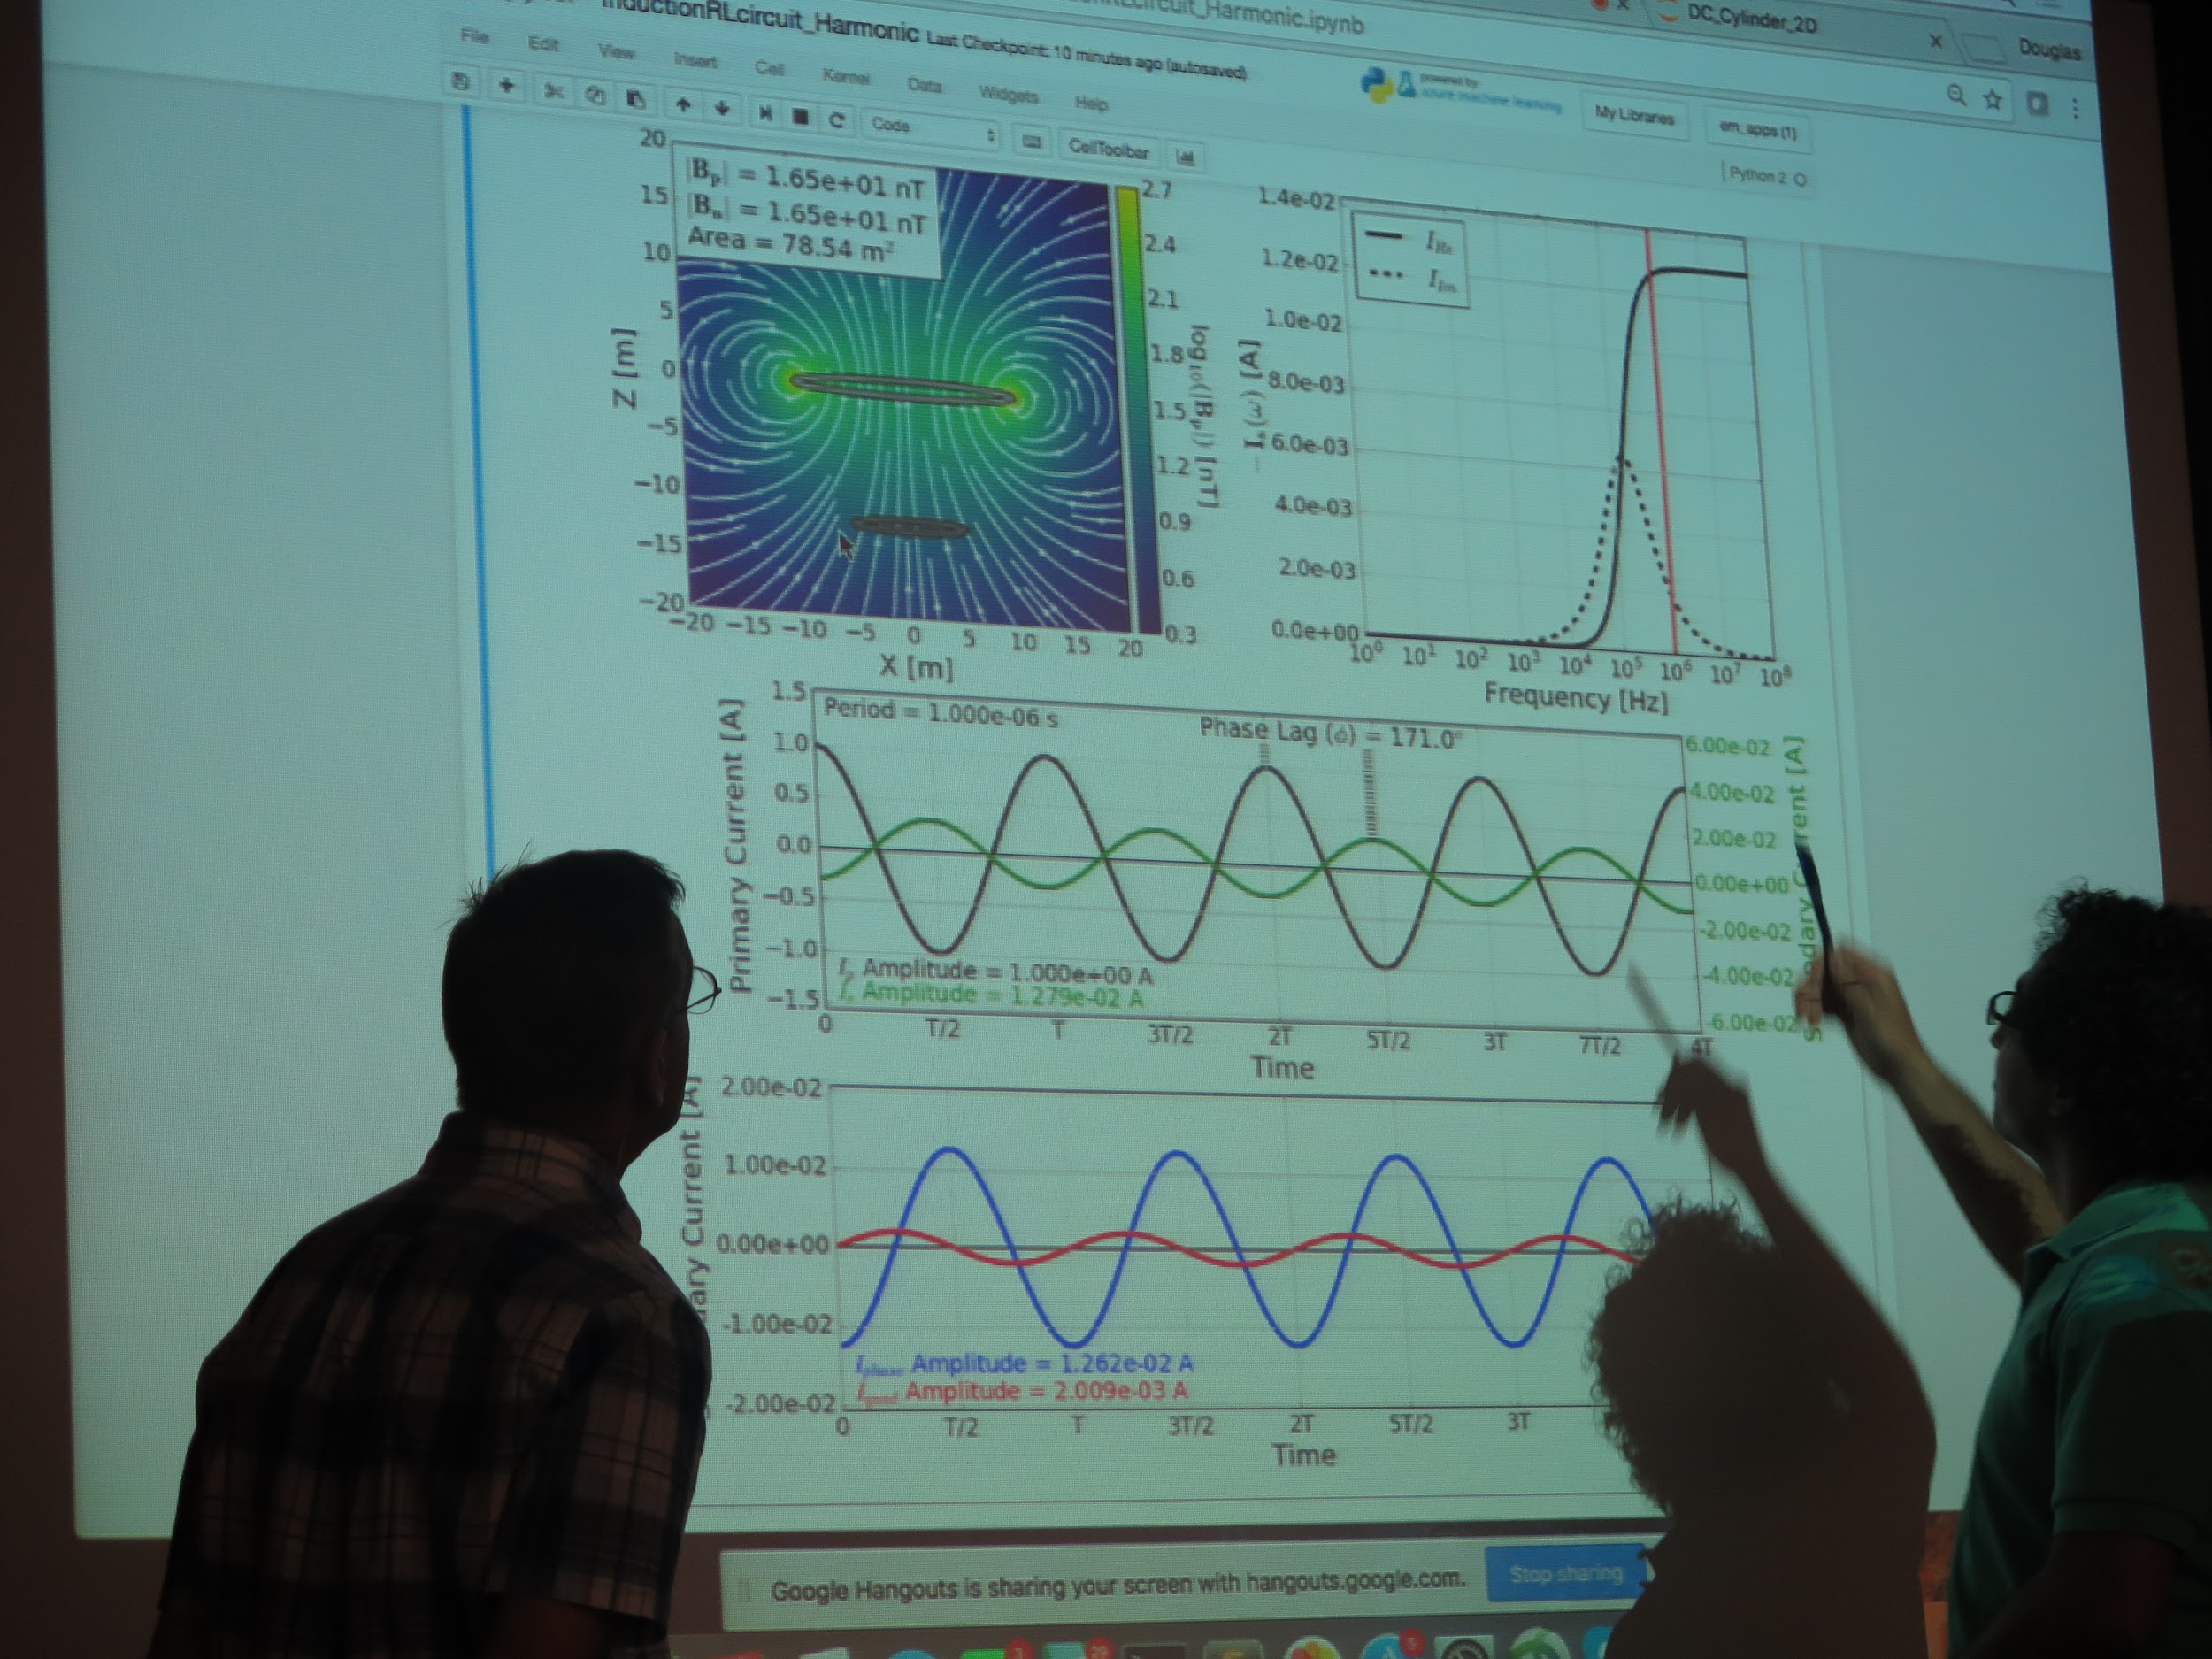 Dr. Douglas Oldenburg (left) engaging with a student during a short course on geophysical electromagnetics (https://geosci.xyz). Photo credit: Seogi Kang